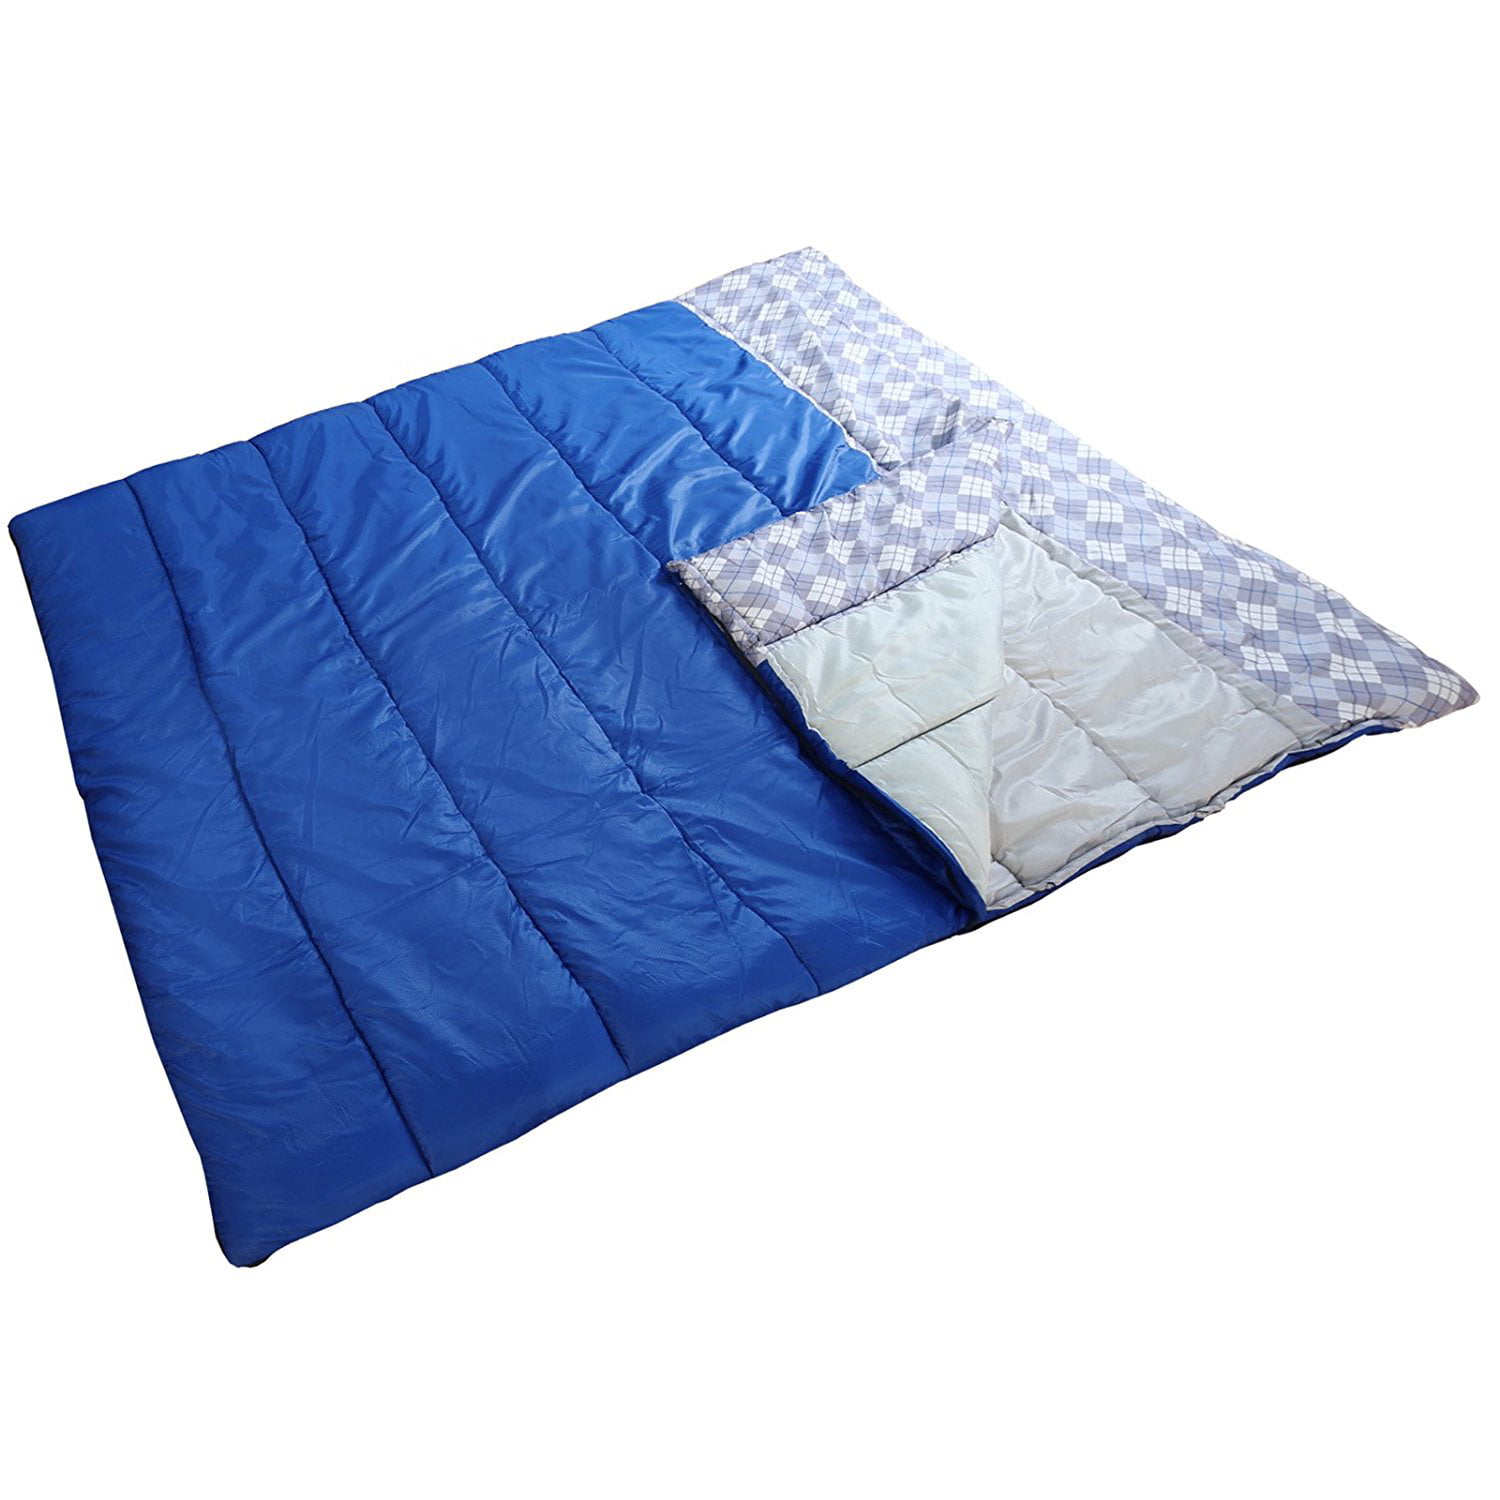 American Trails Ozzie & Harriet Double Person Giant Sleeping Bag in ...